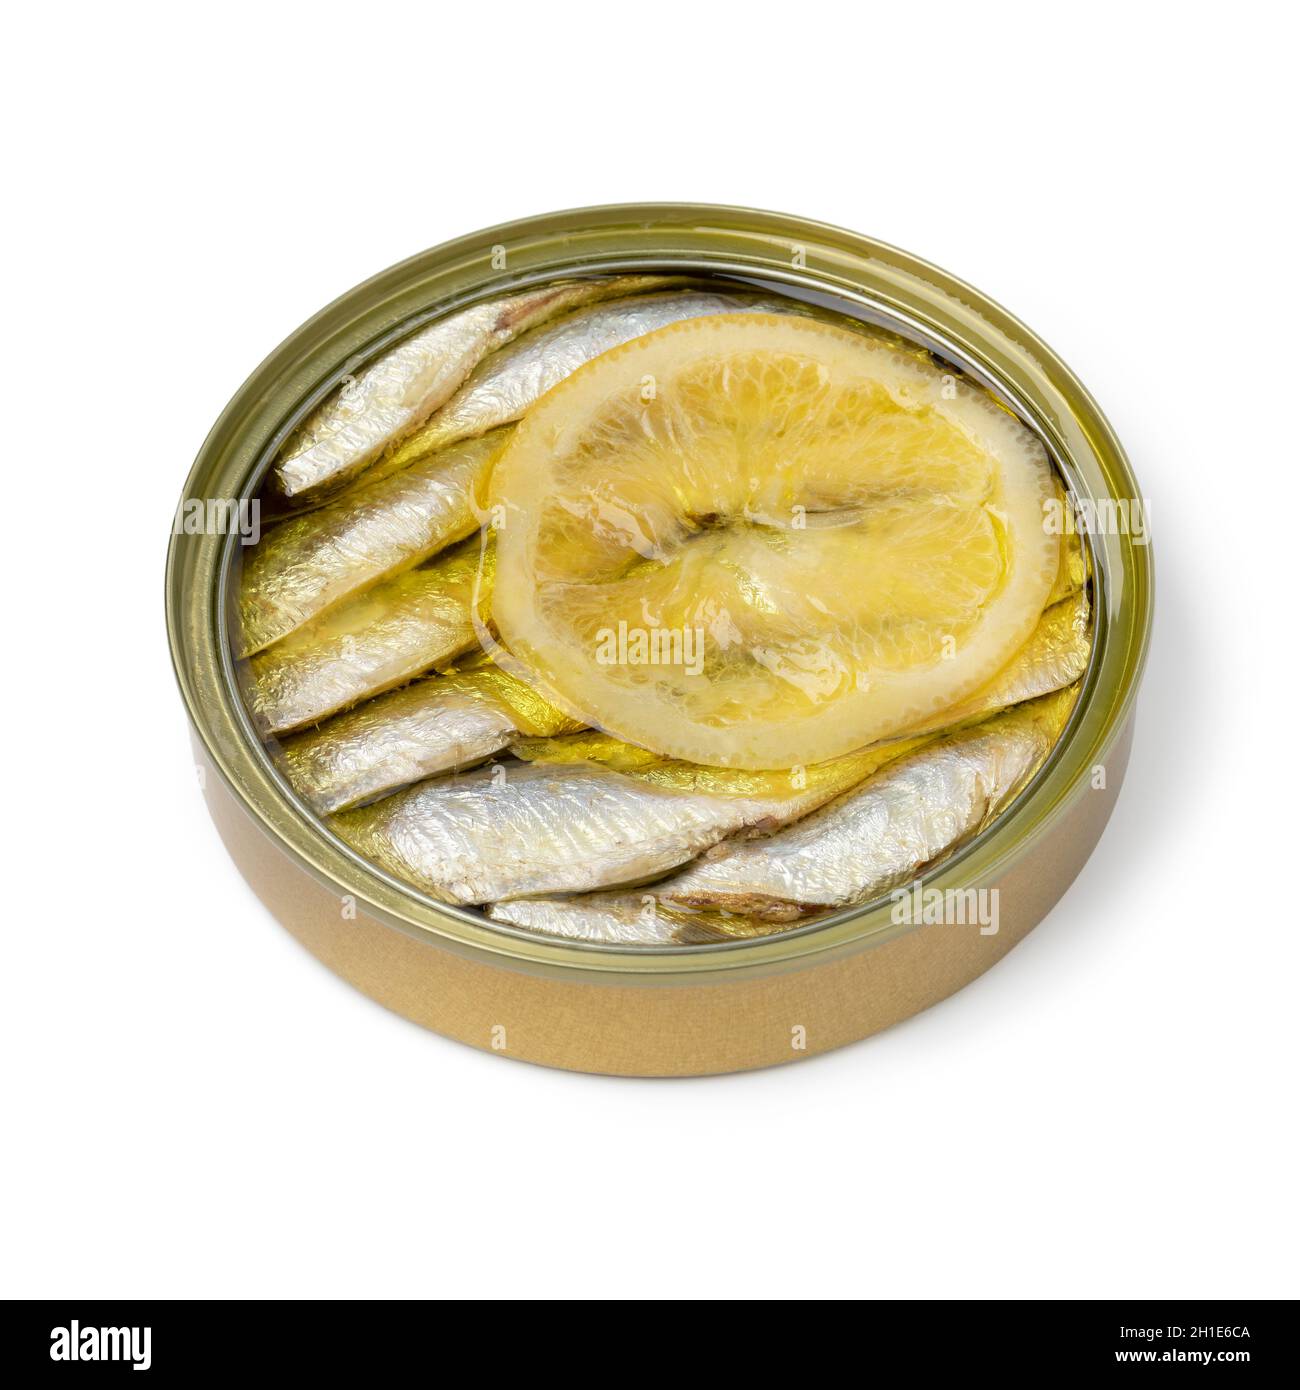 Canned smoked European sprat in oil with a slice of lemon isolated on white background Stock Photo